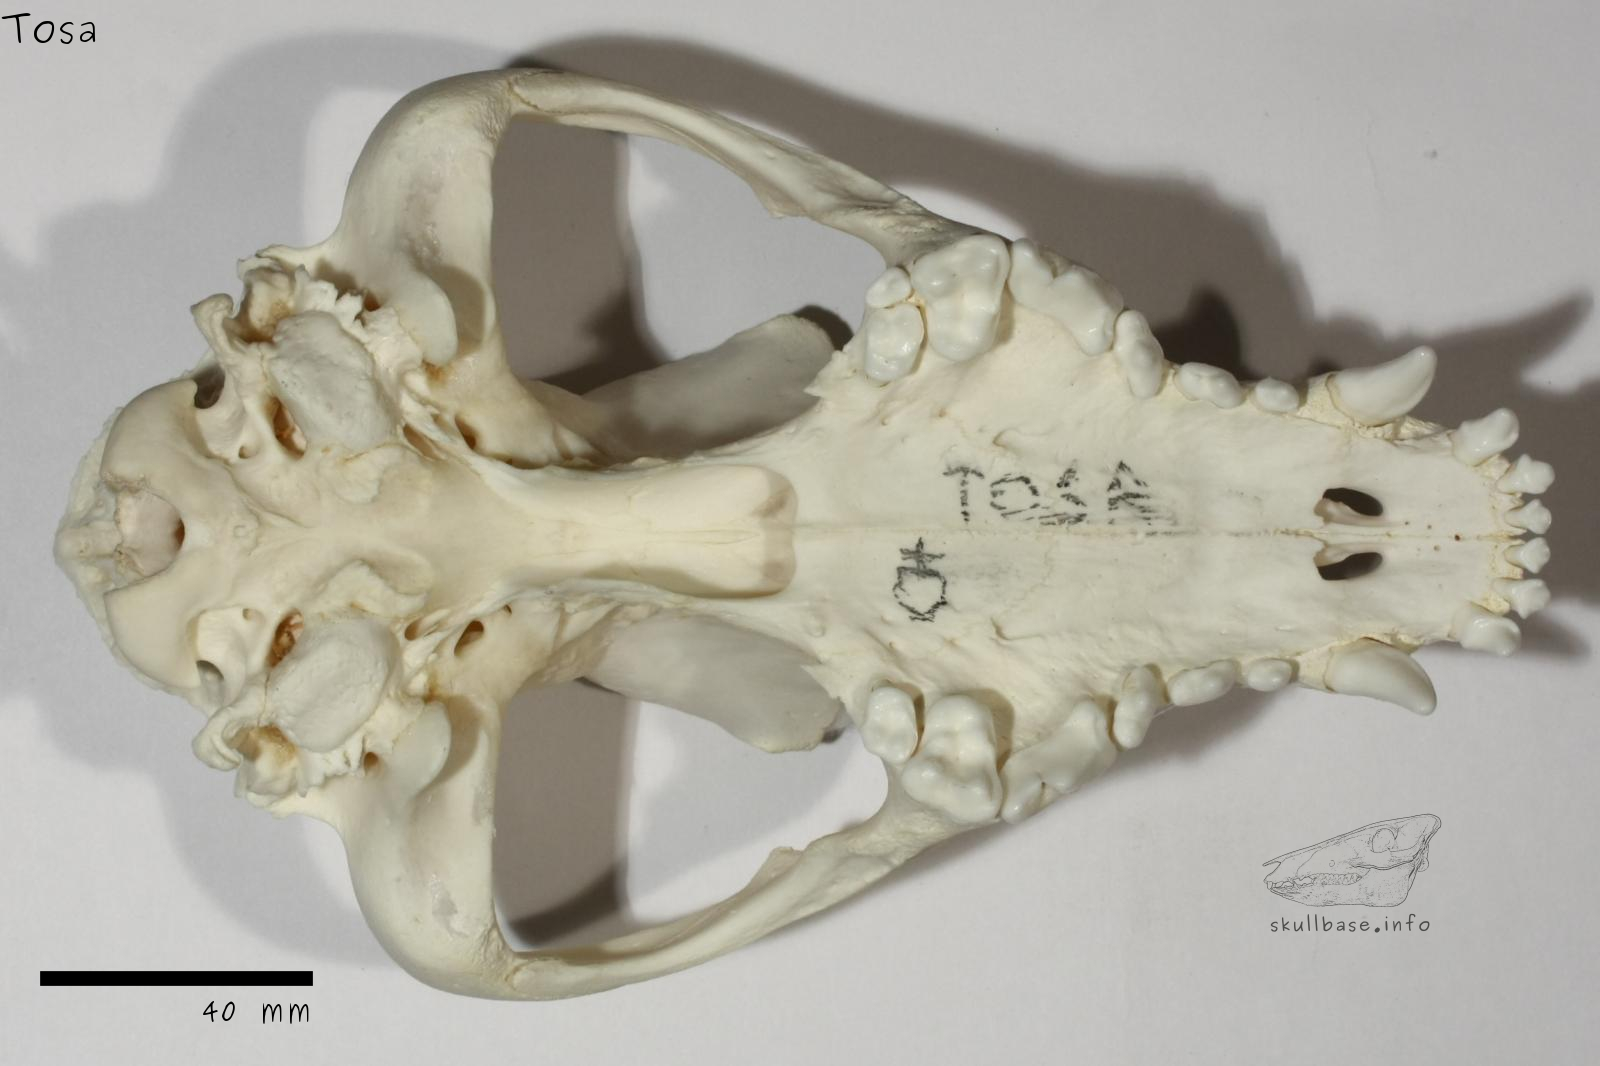 Tosa (Canis lupus familiaris) skull ventral view